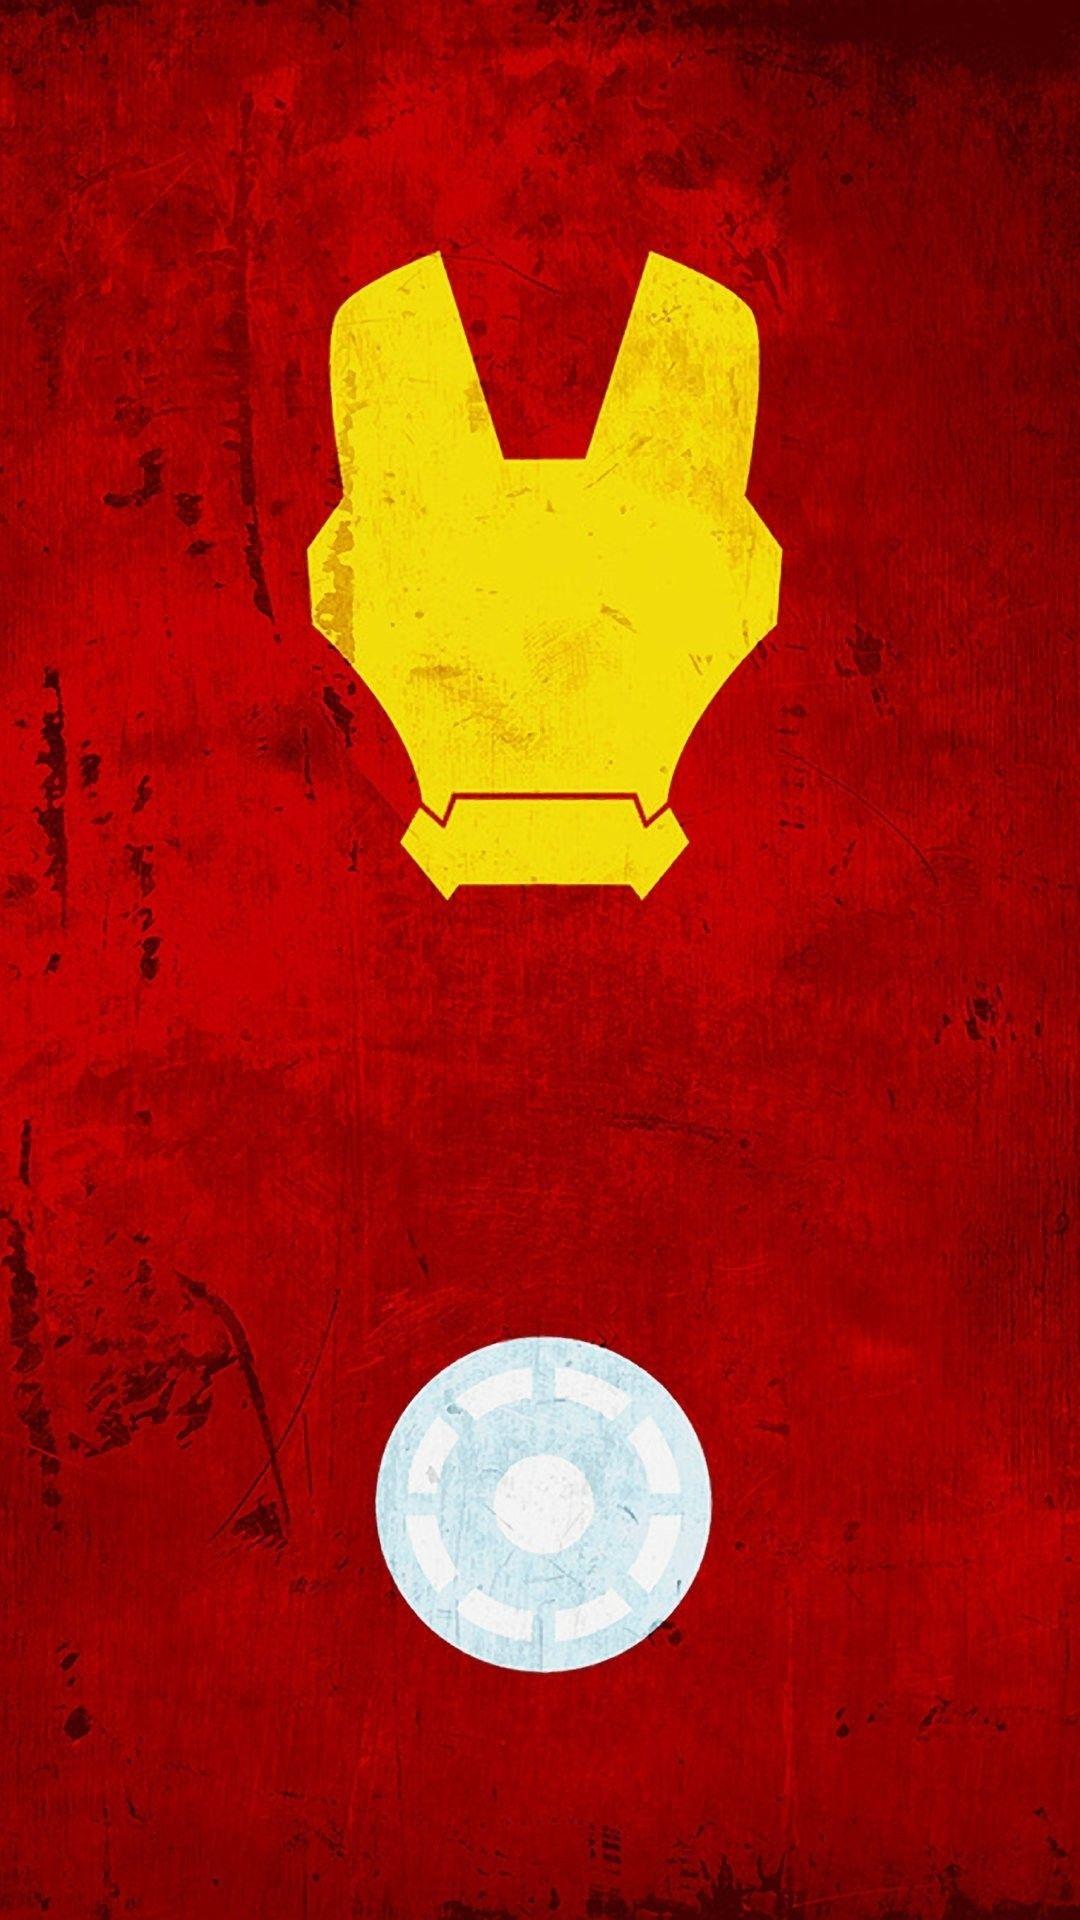 Ironman HD Wallpaper for OnePlus 3